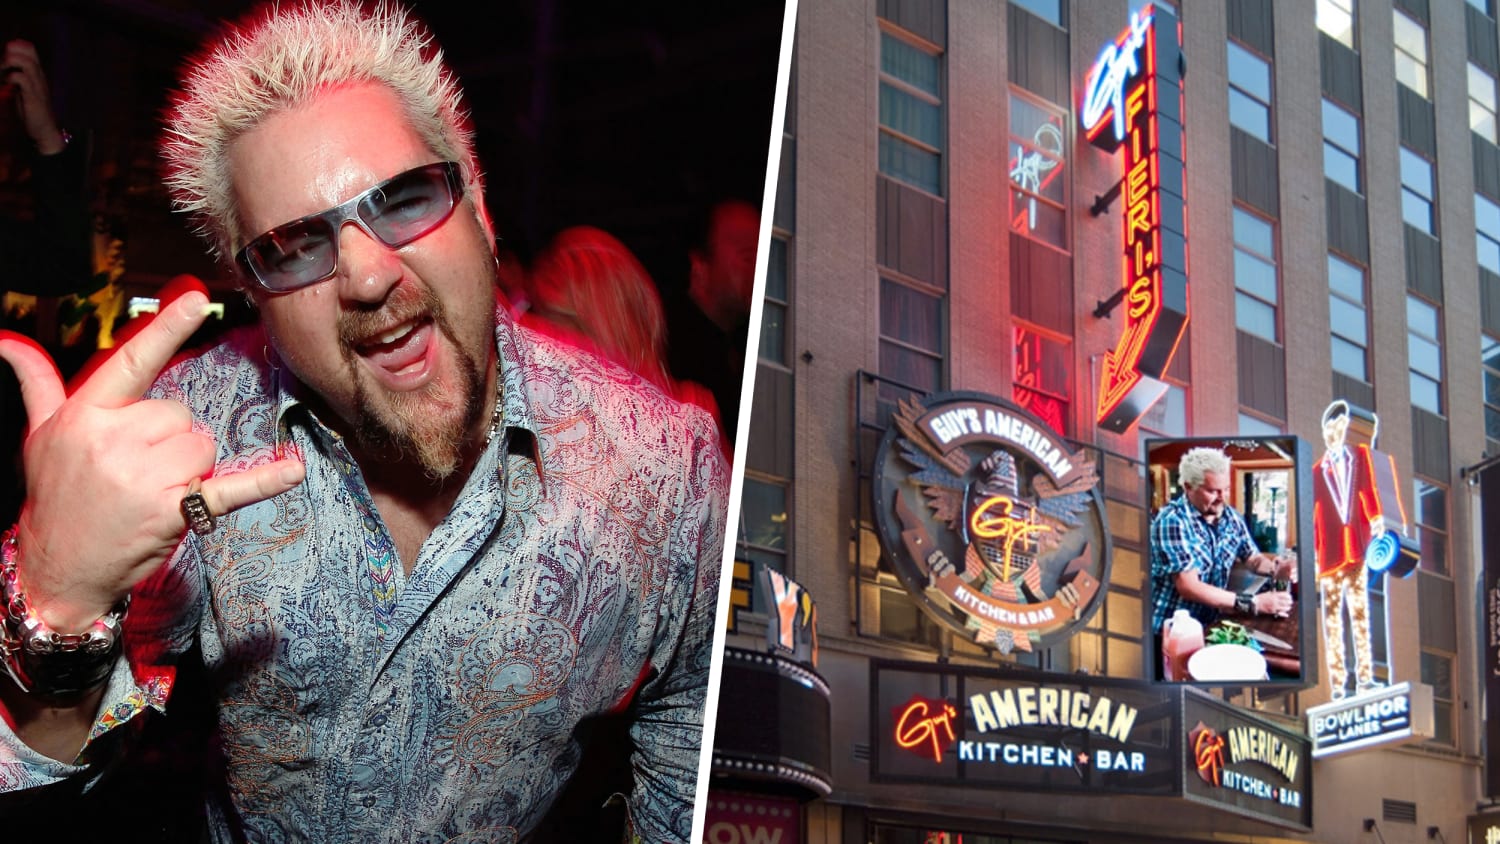 Guy Fieri S Infamous Times Square Restaurant Closing